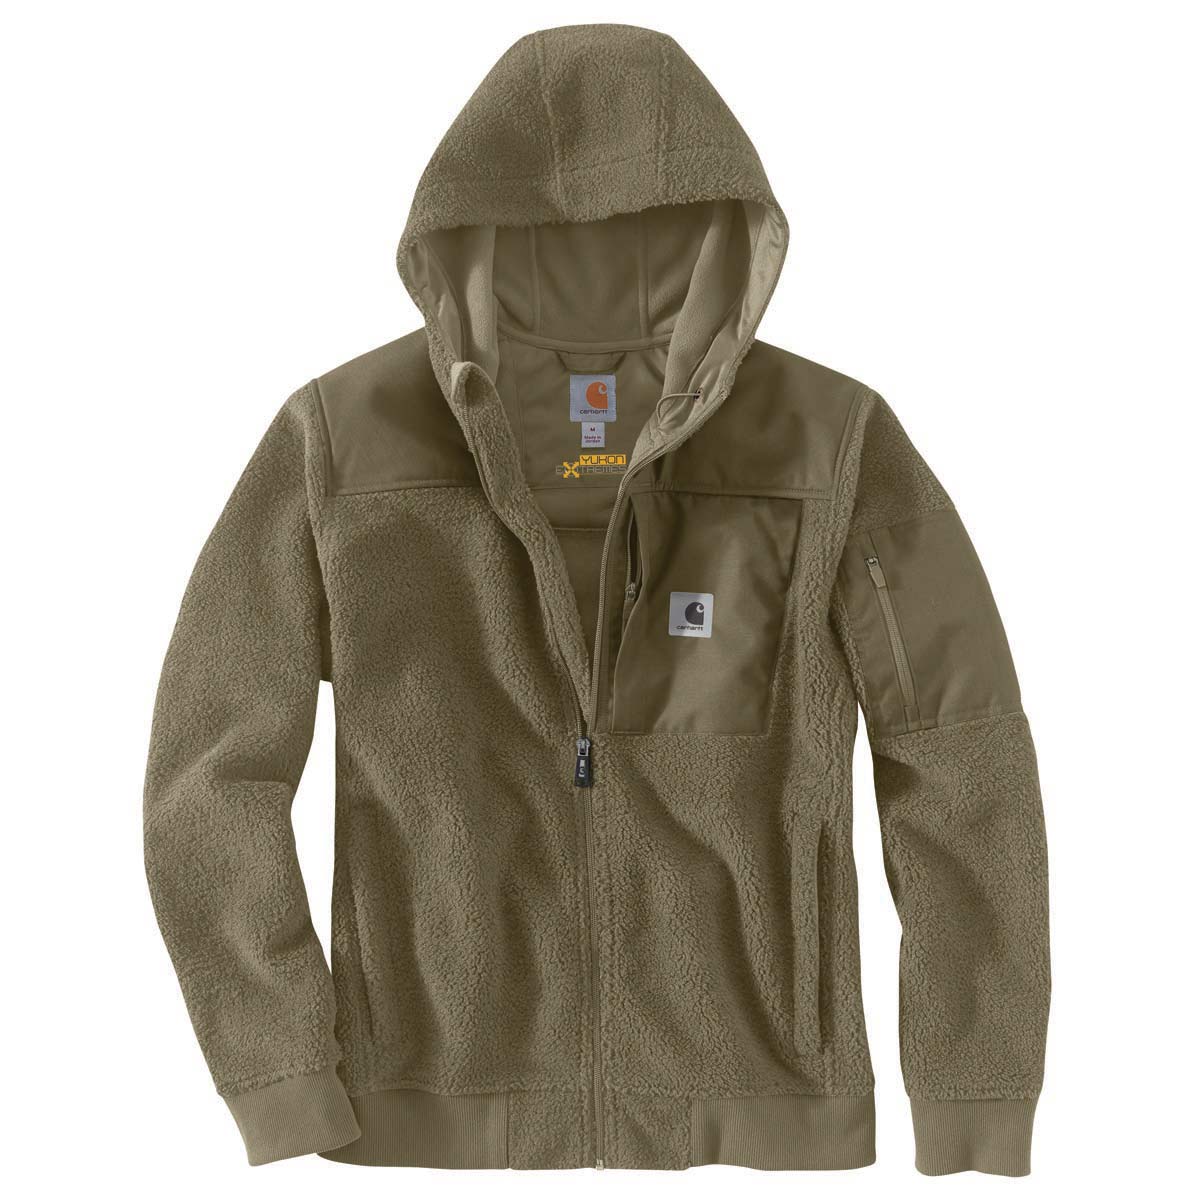 Carhartt Men's Yukon Extremes Wind Fighter Fleece Active Jac - Discontinued Pricing